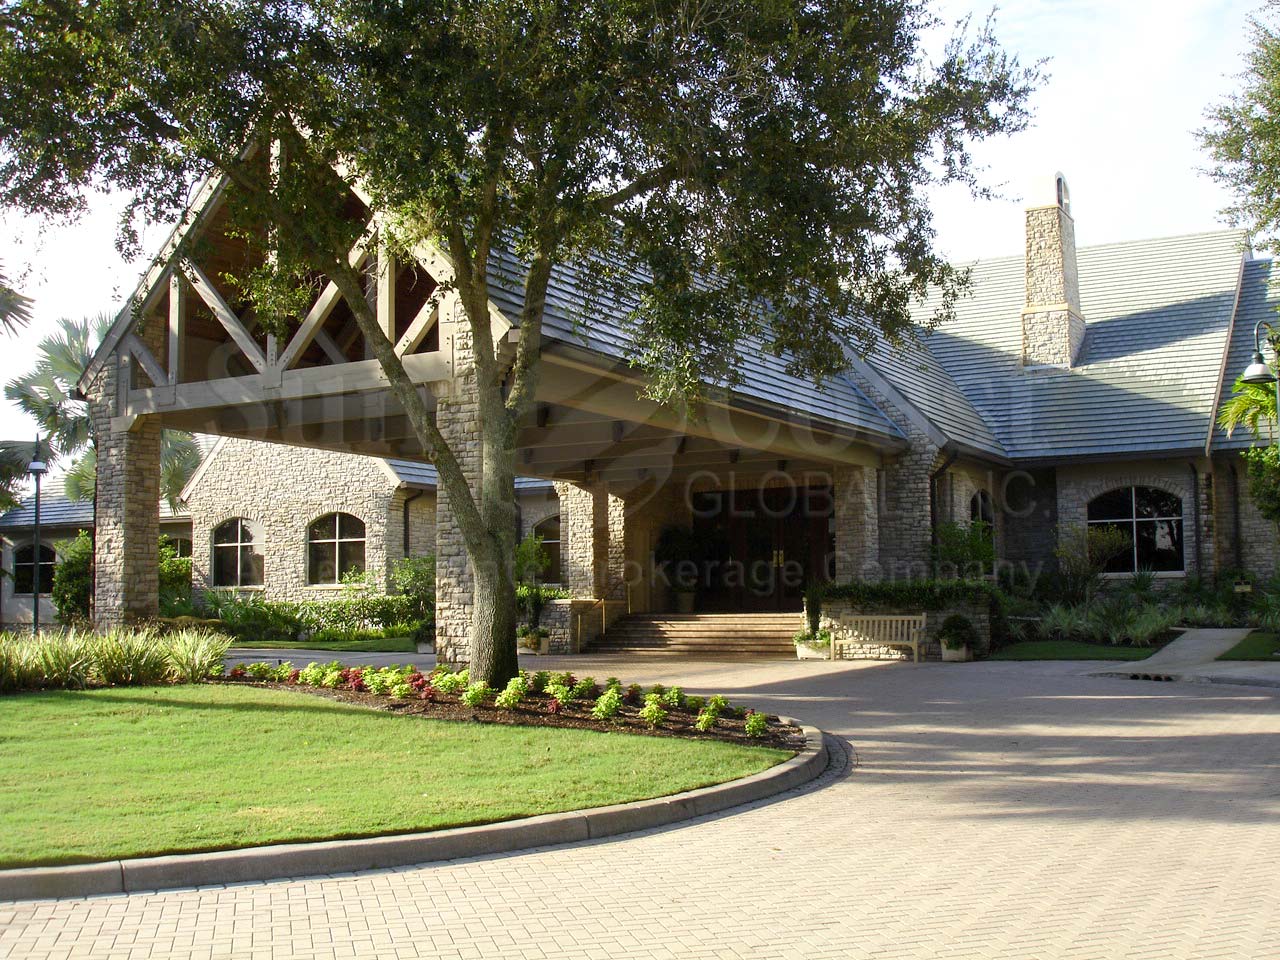 TWIN EAGLES Golf and Country Club